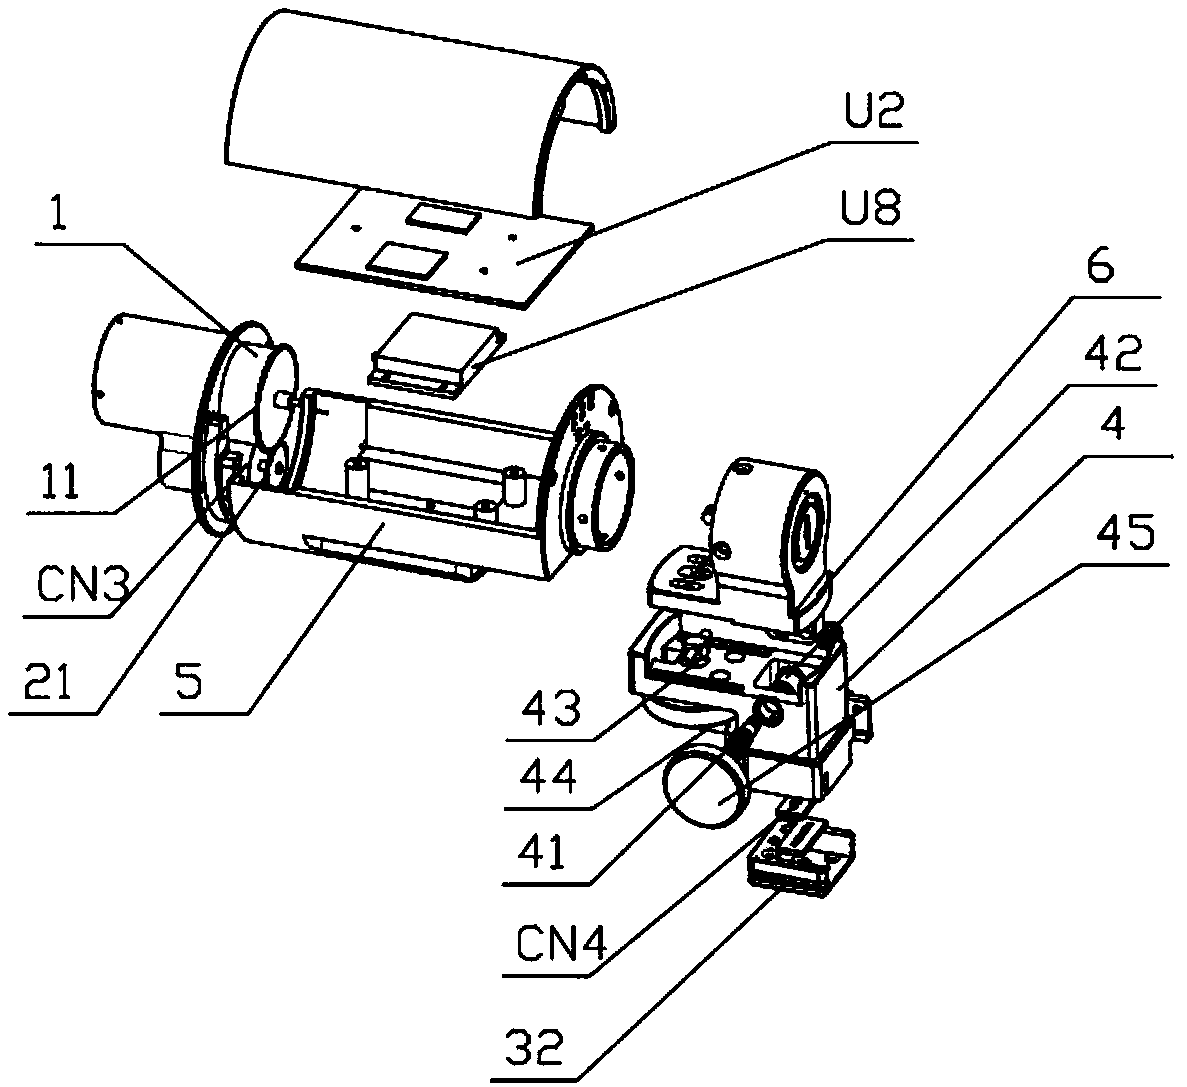 Electric-controlled infrared laser device and imaging device